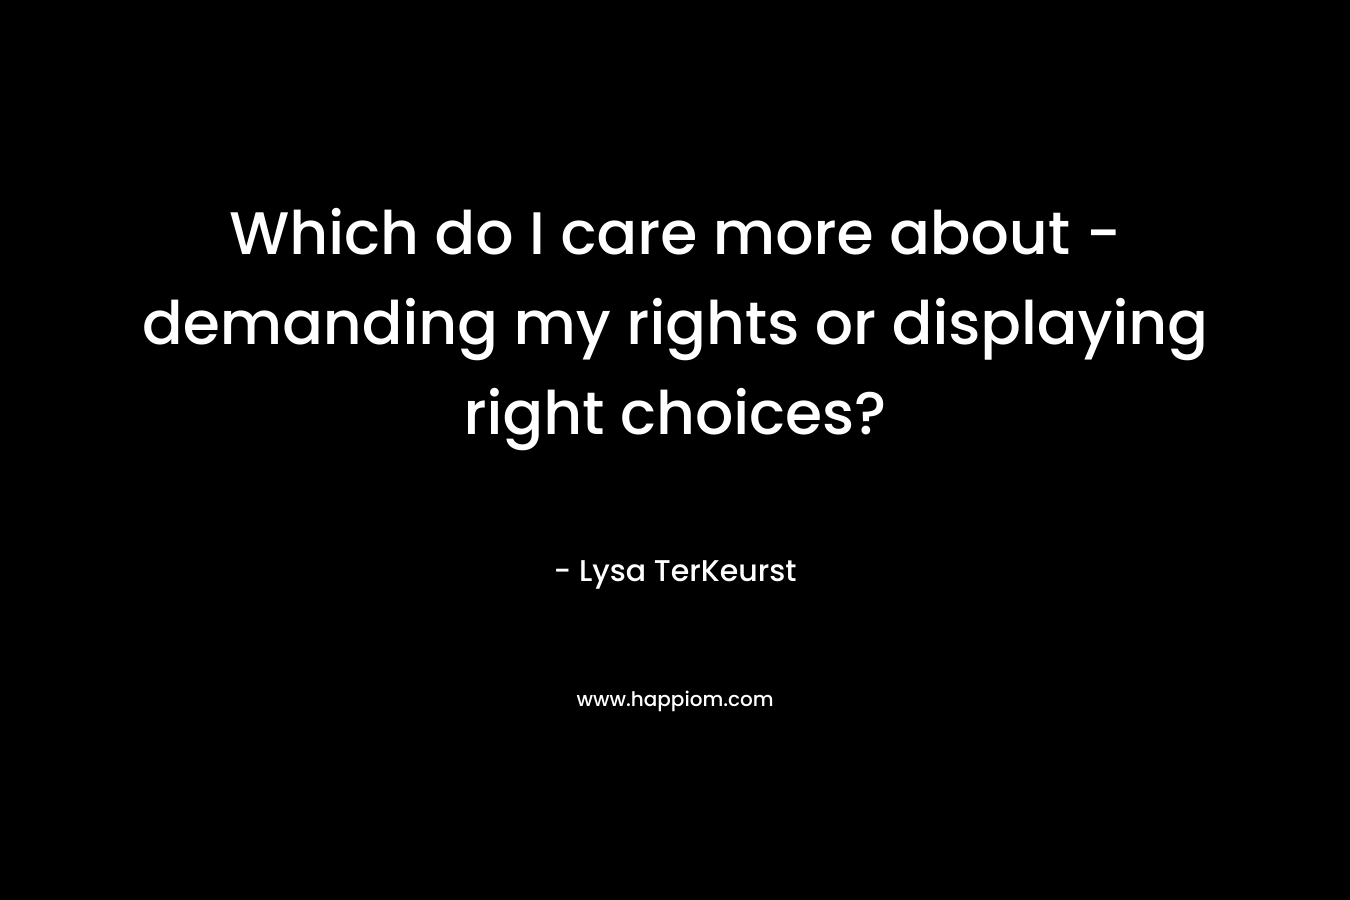 Which do I care more about - demanding my rights or displaying right choices?